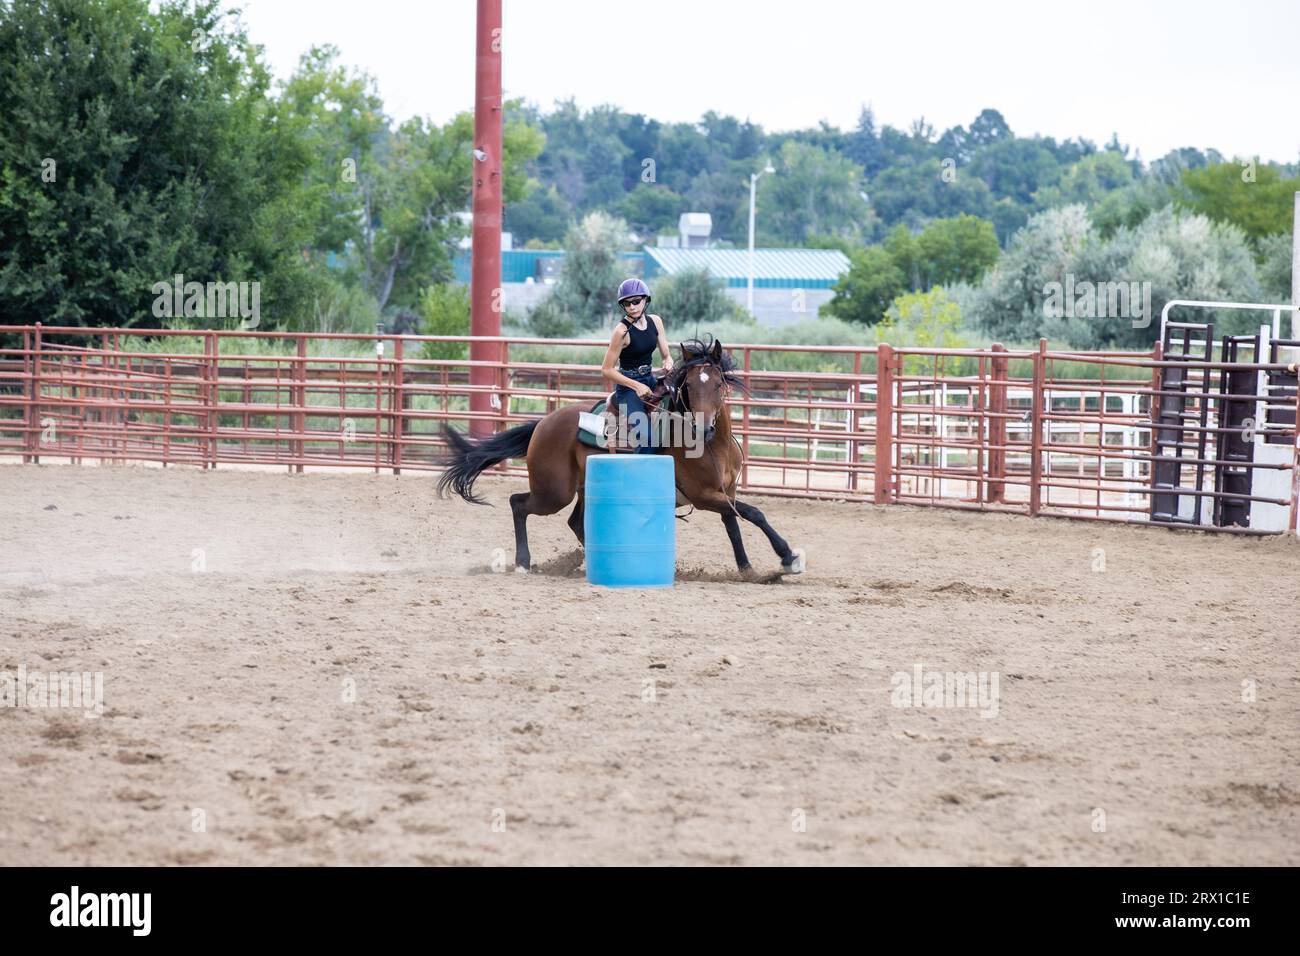 Teenage girl riding her horse around a barrel at rodeo Stock Photo